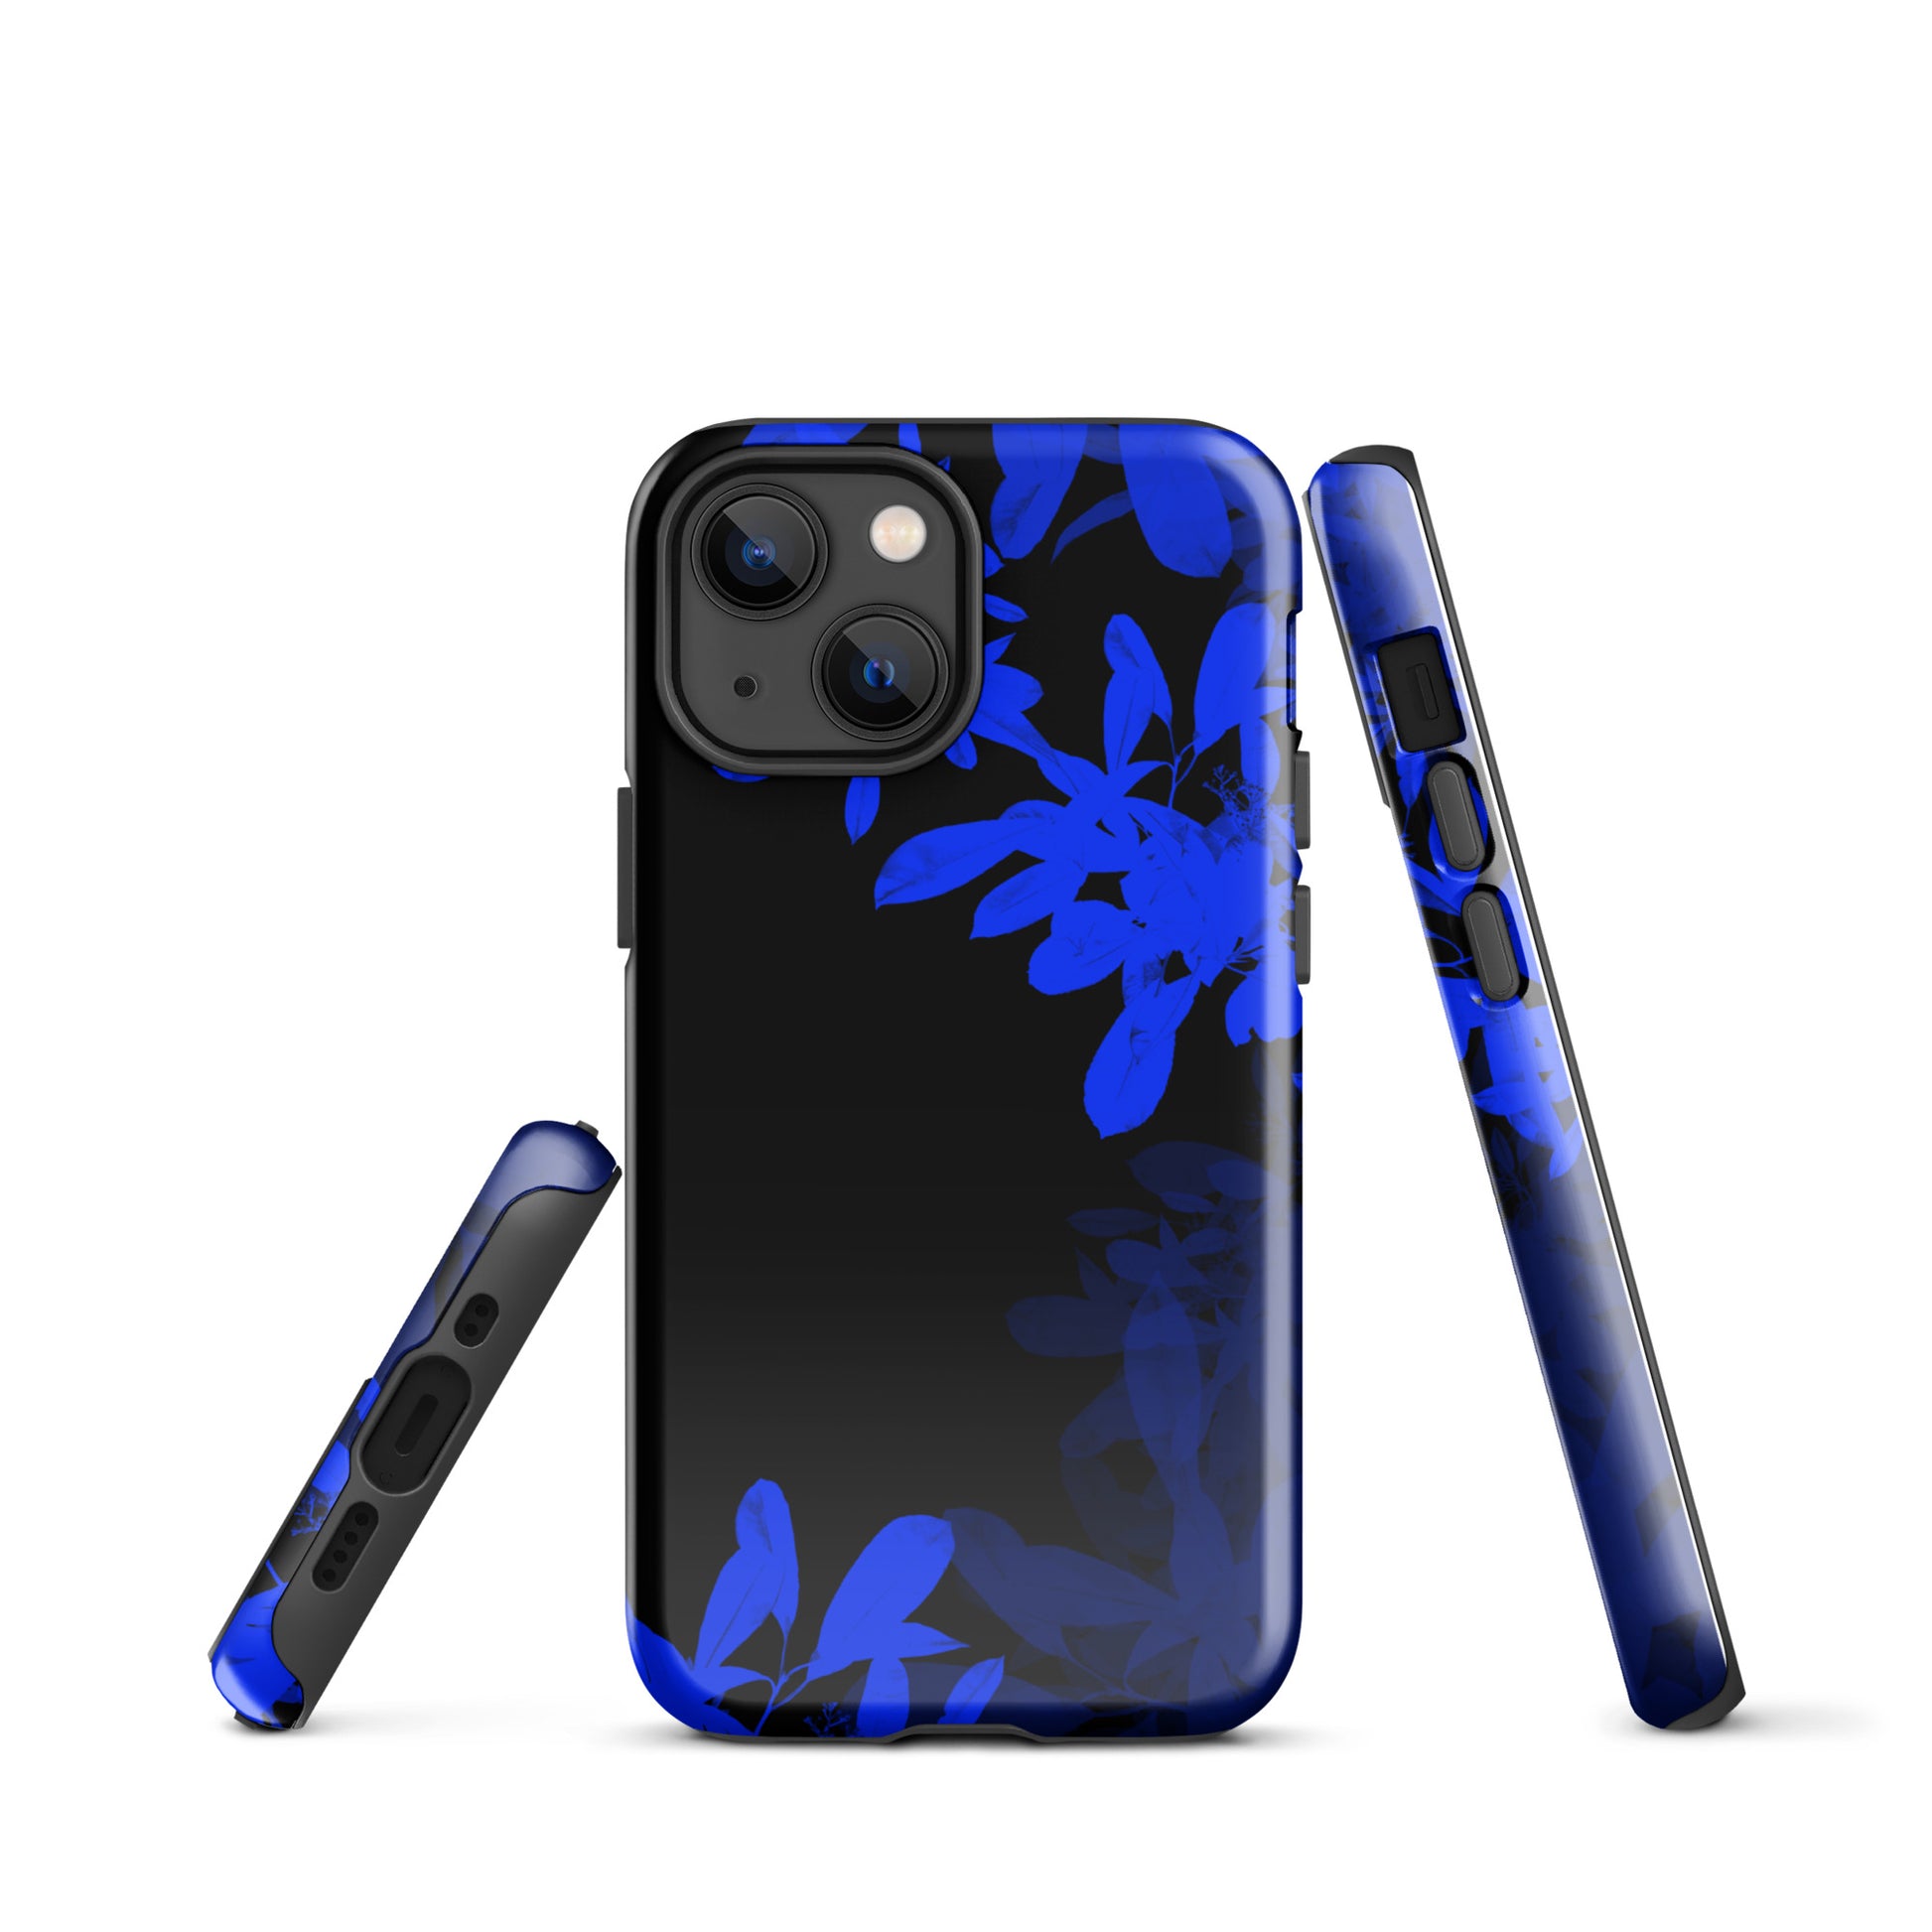 A Night Blue Plant Case for the iPhone 13 Mini